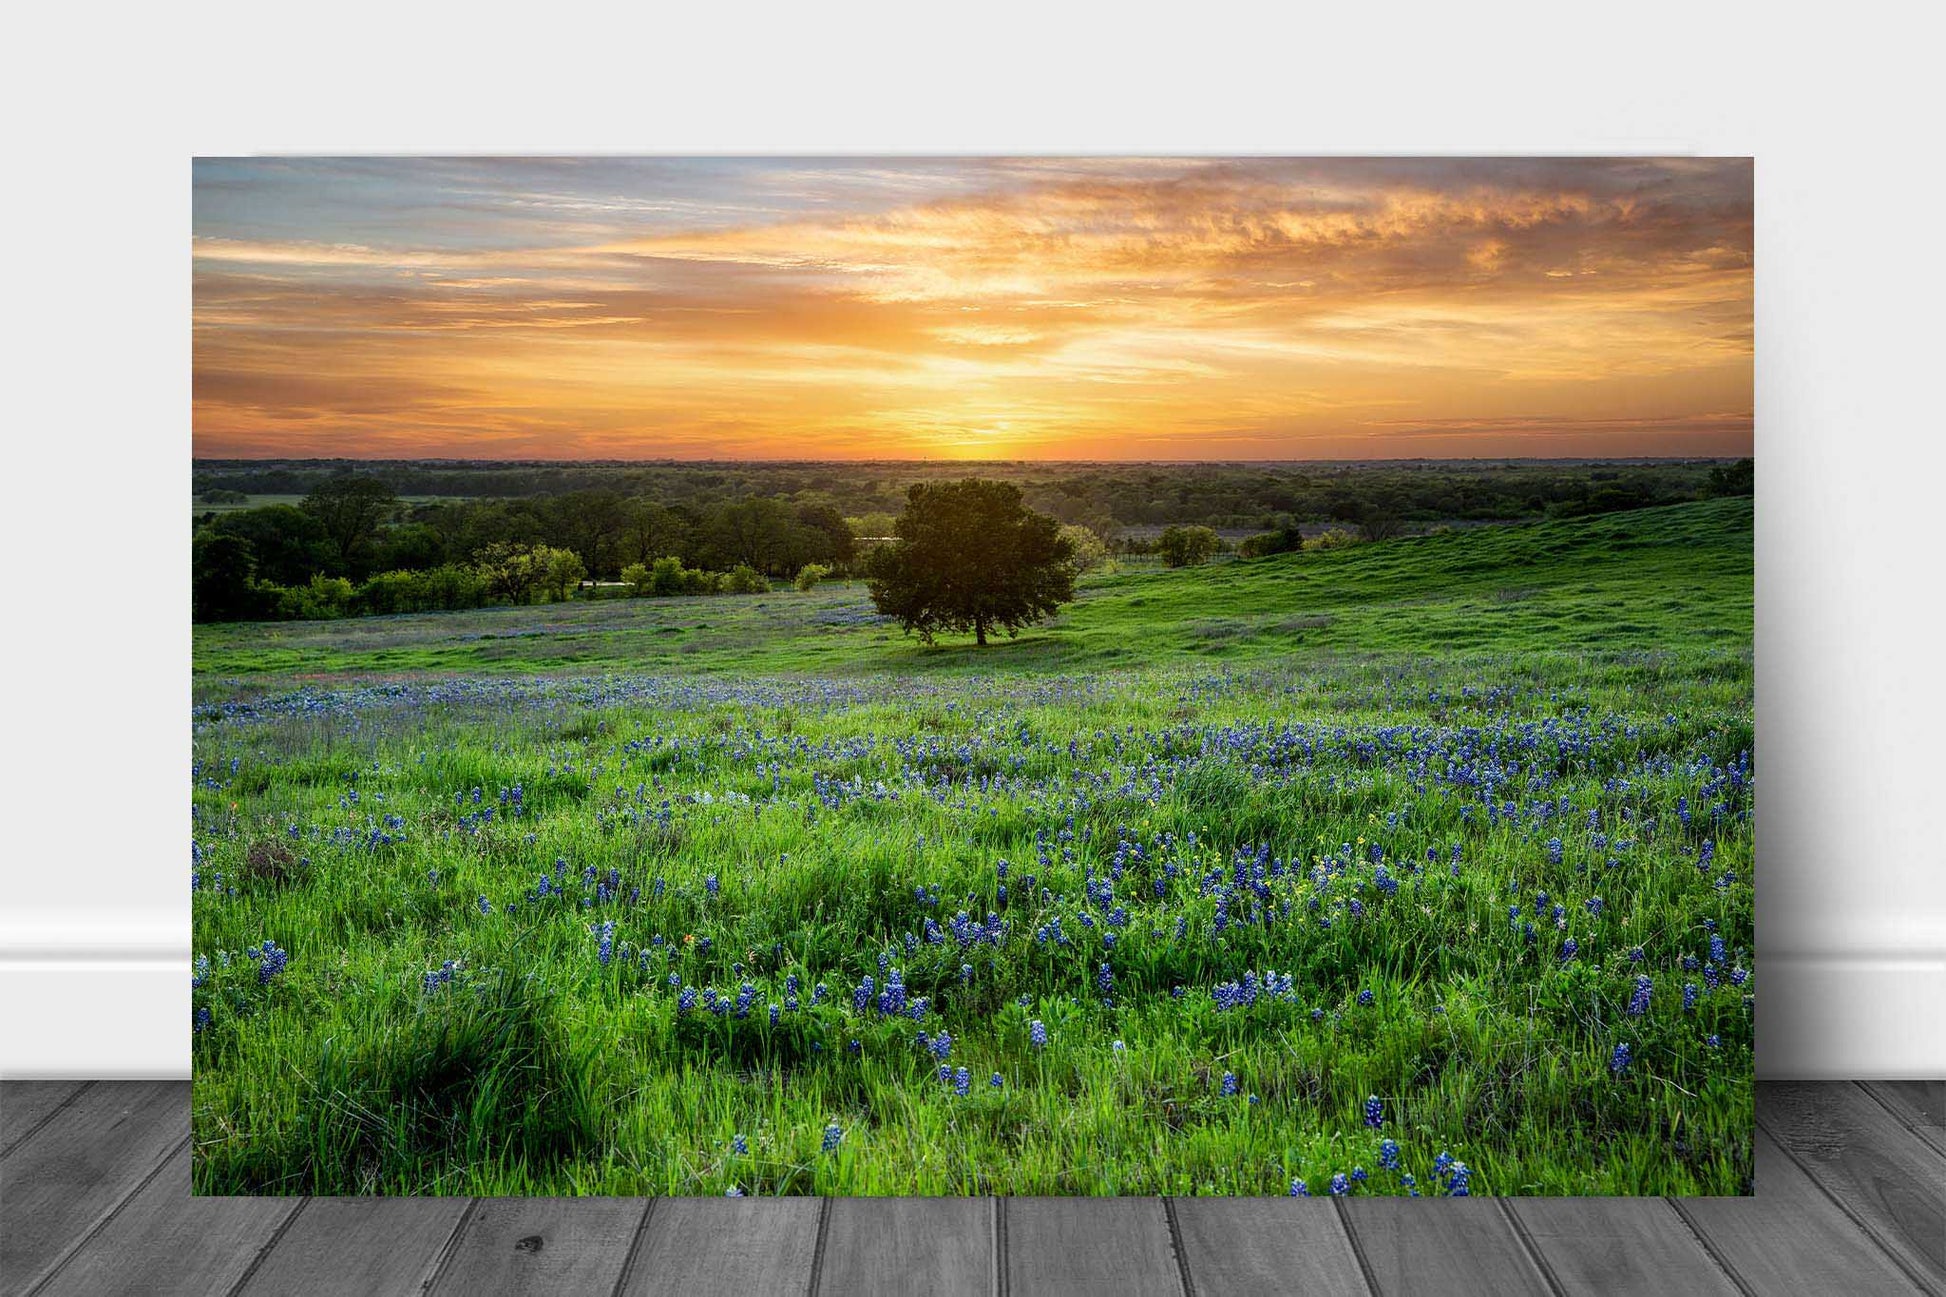 Landscape metal print of a lone tree in a field of bluebonnet wildflowers at sunset on a spring evening in Texas by Sean Ramsey of Southern Plains Photography.